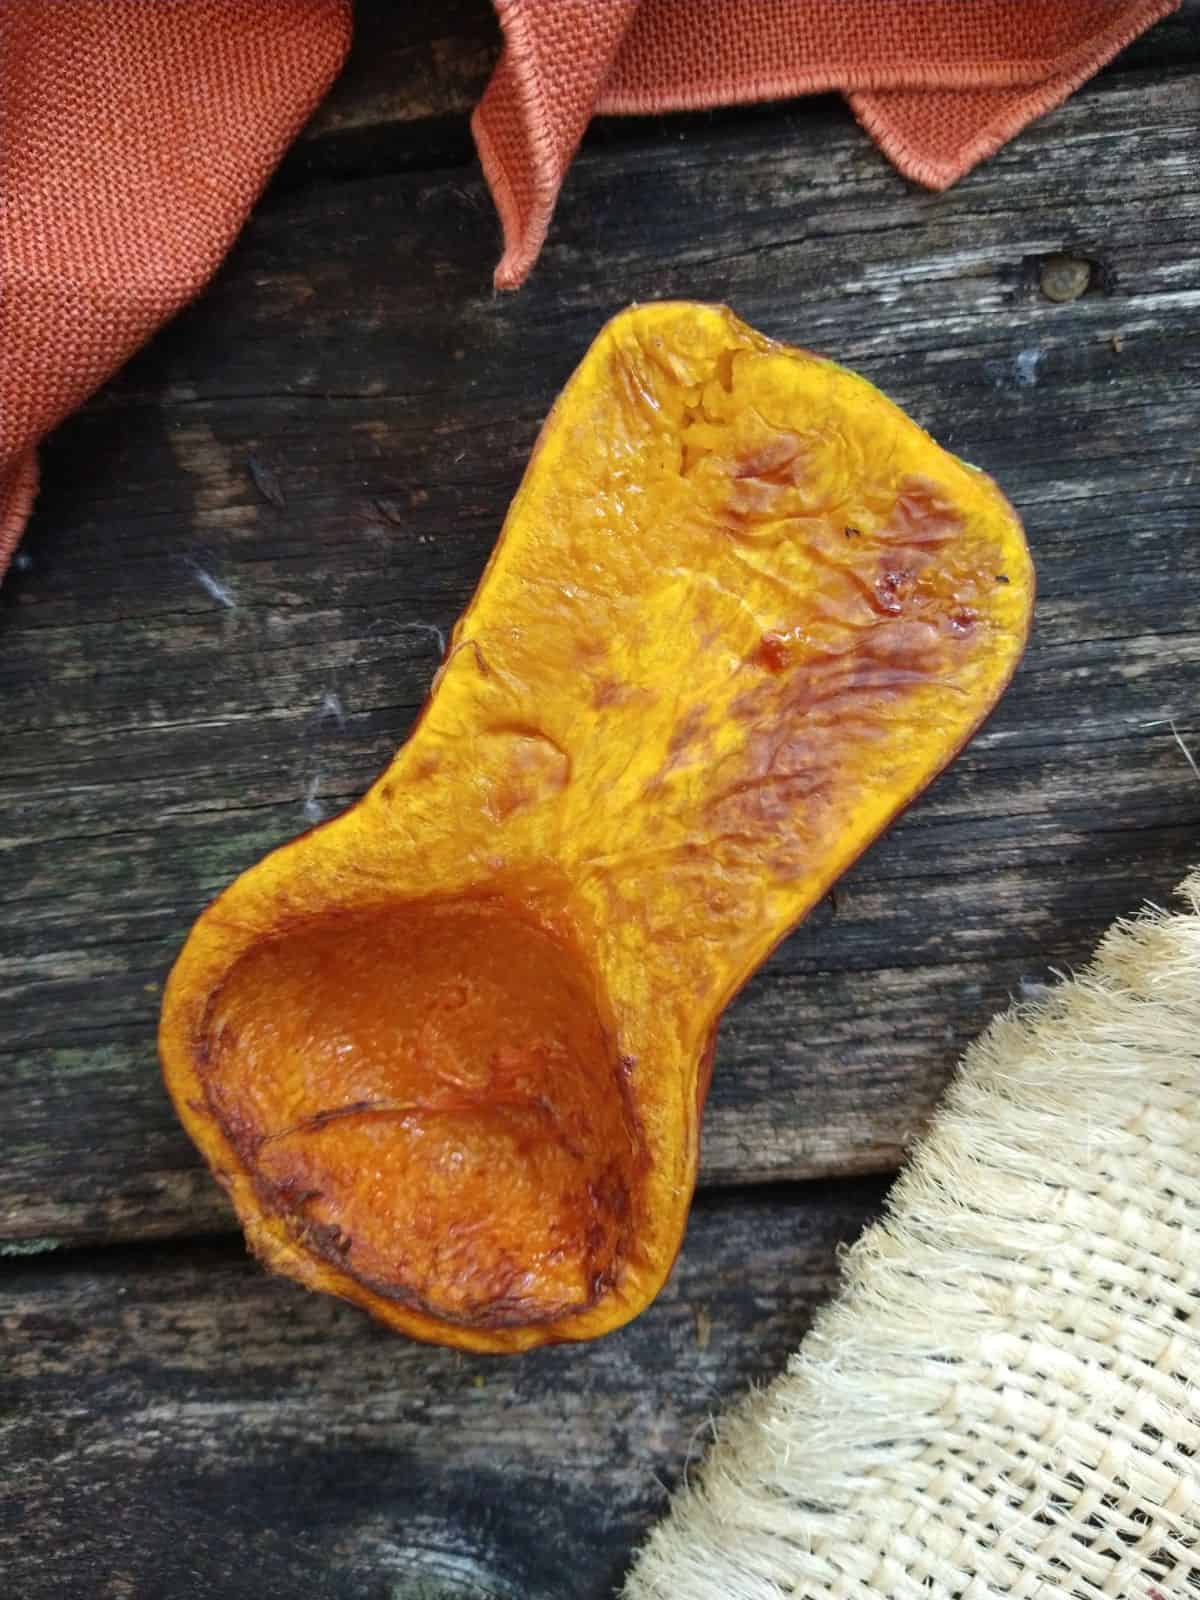 A halved Honeynut squash that has been browned in the air fryer sitting on a wood picnic table.